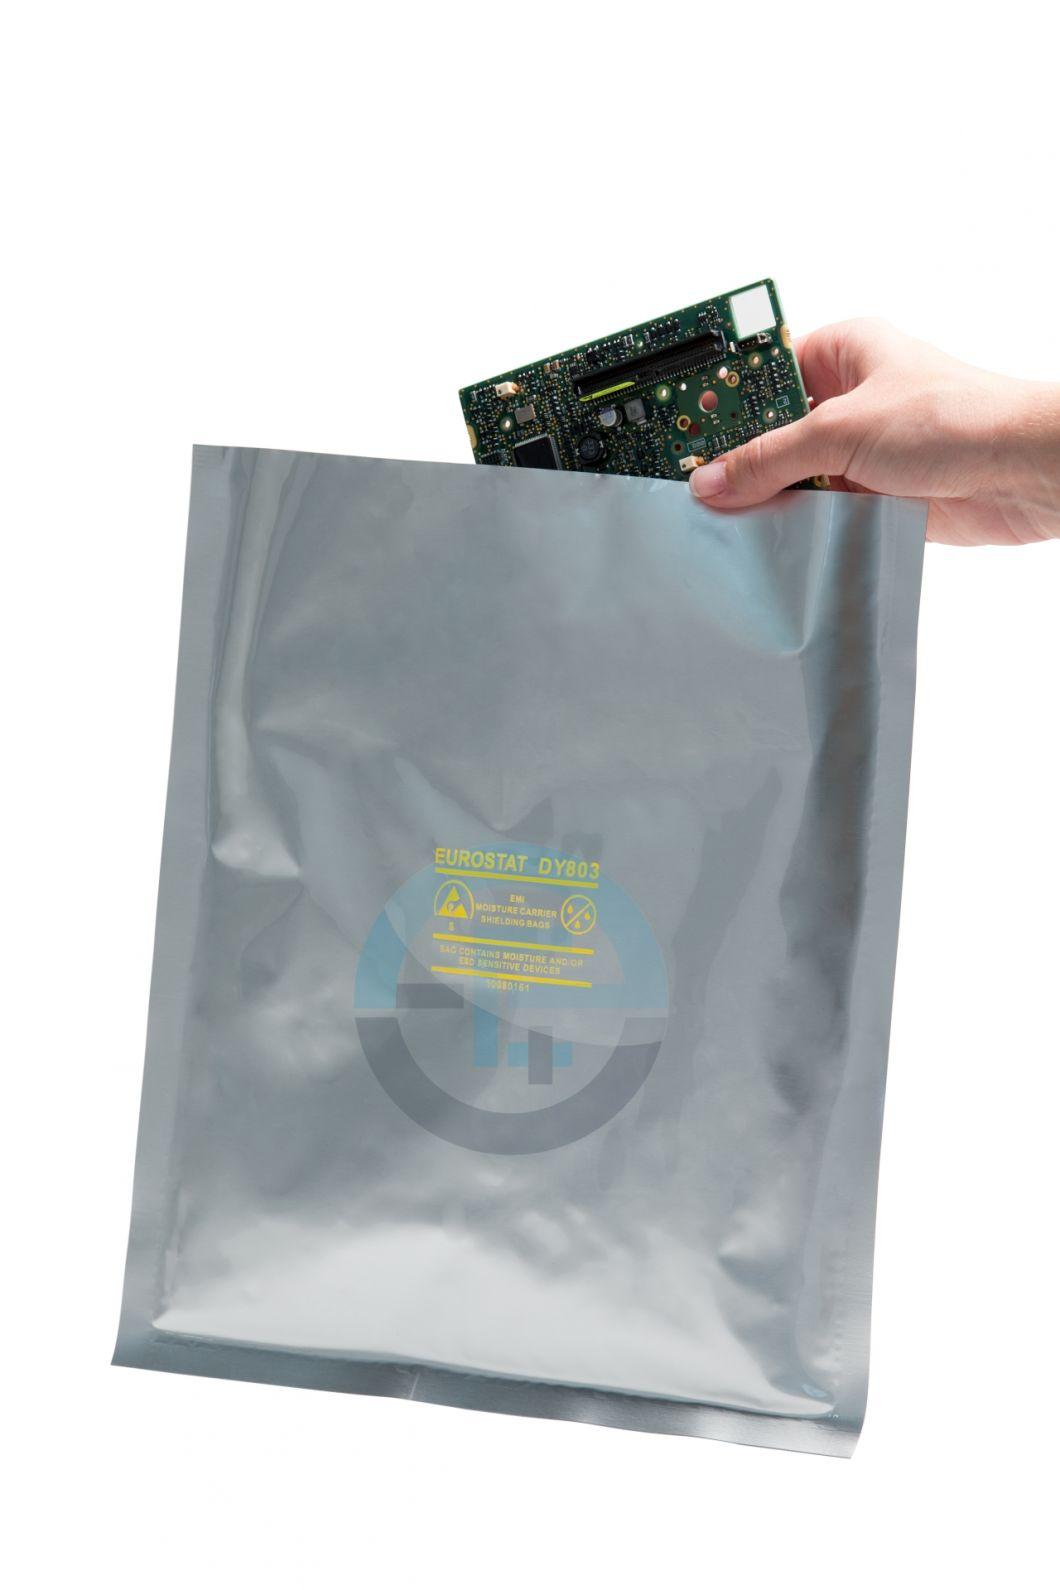 Antistaic Moisture Barrier Bags for Packaging Wafer